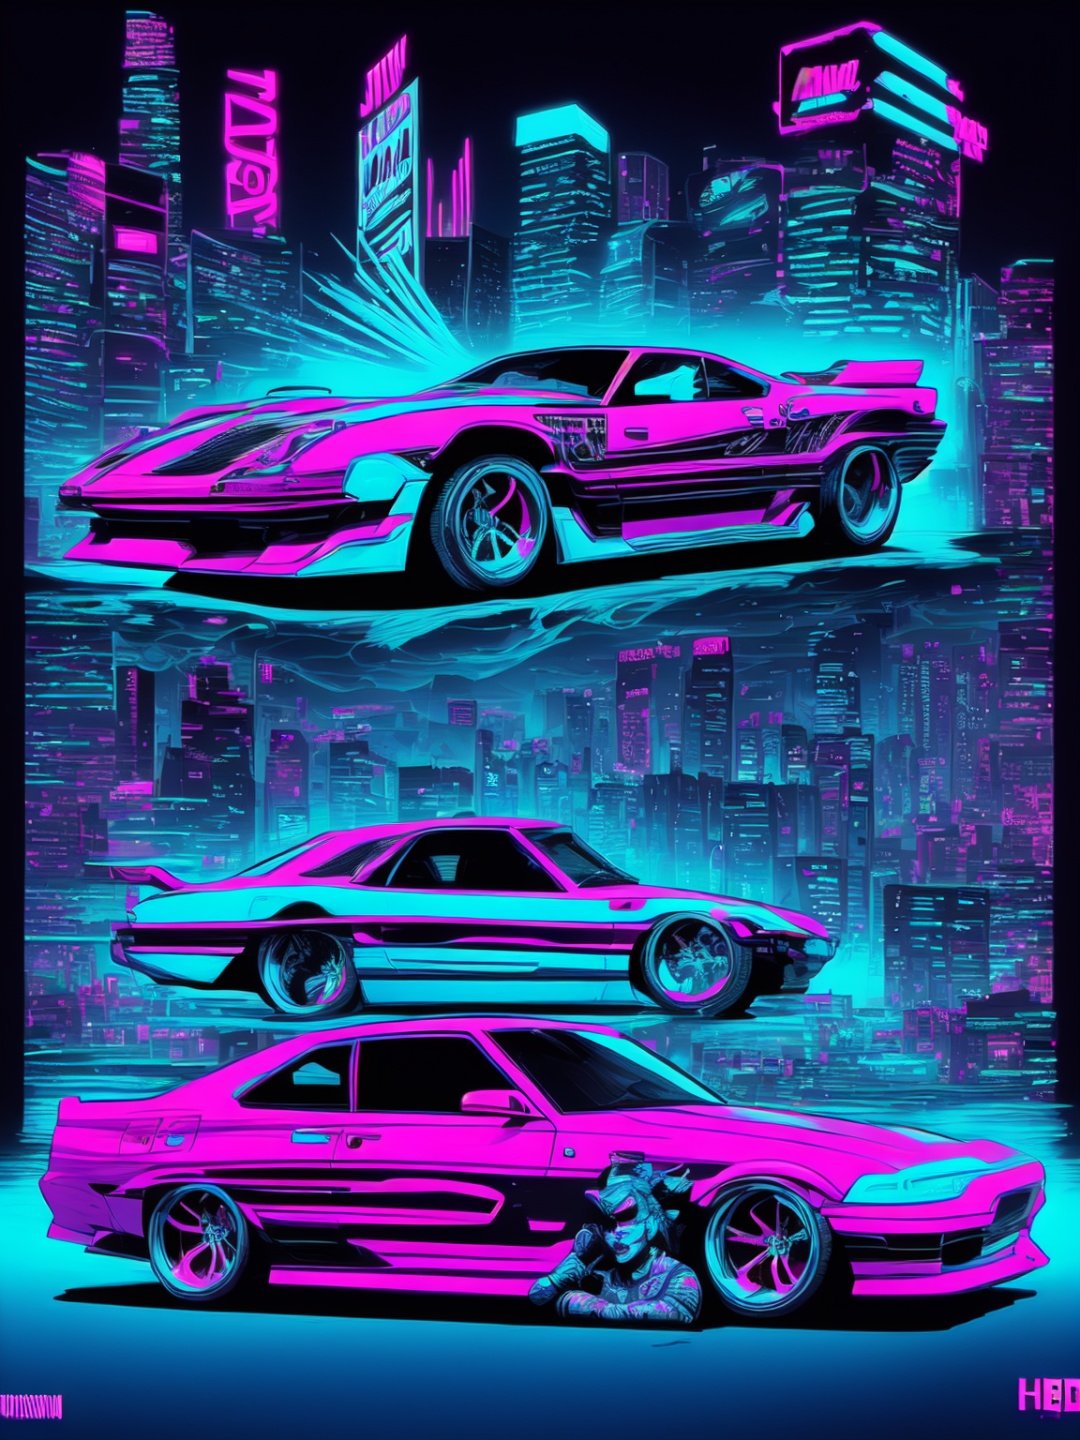 synthwave design neon colors, comic book style illustration, hard line art, precise details, extremely detailed,Car,Women